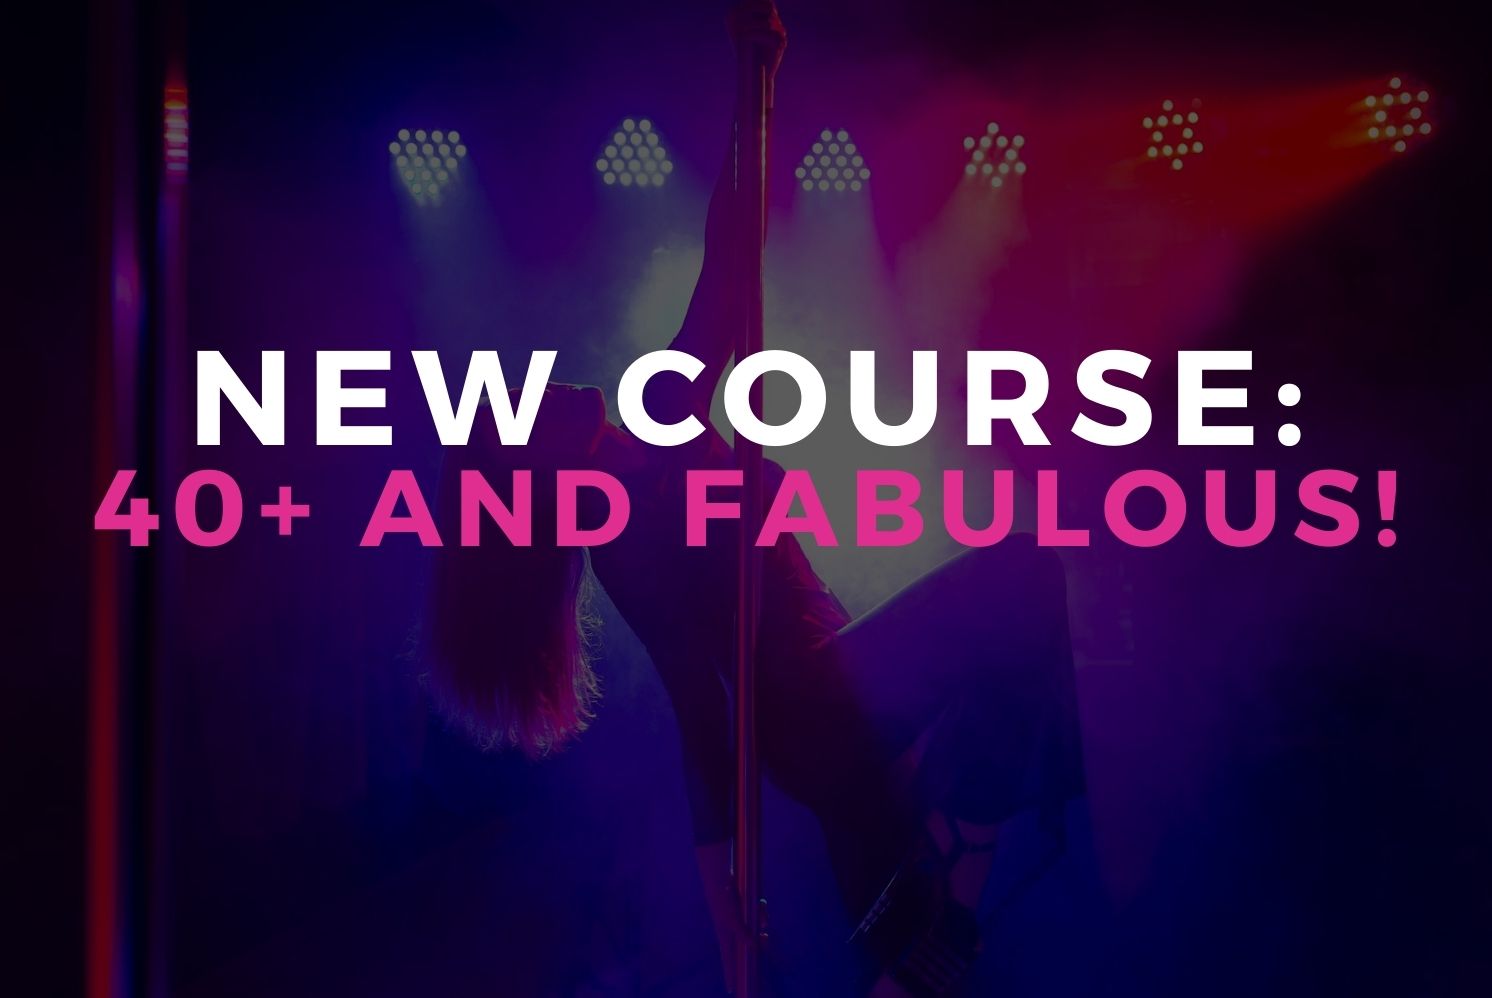 New Course: 40+ and Fabulous!